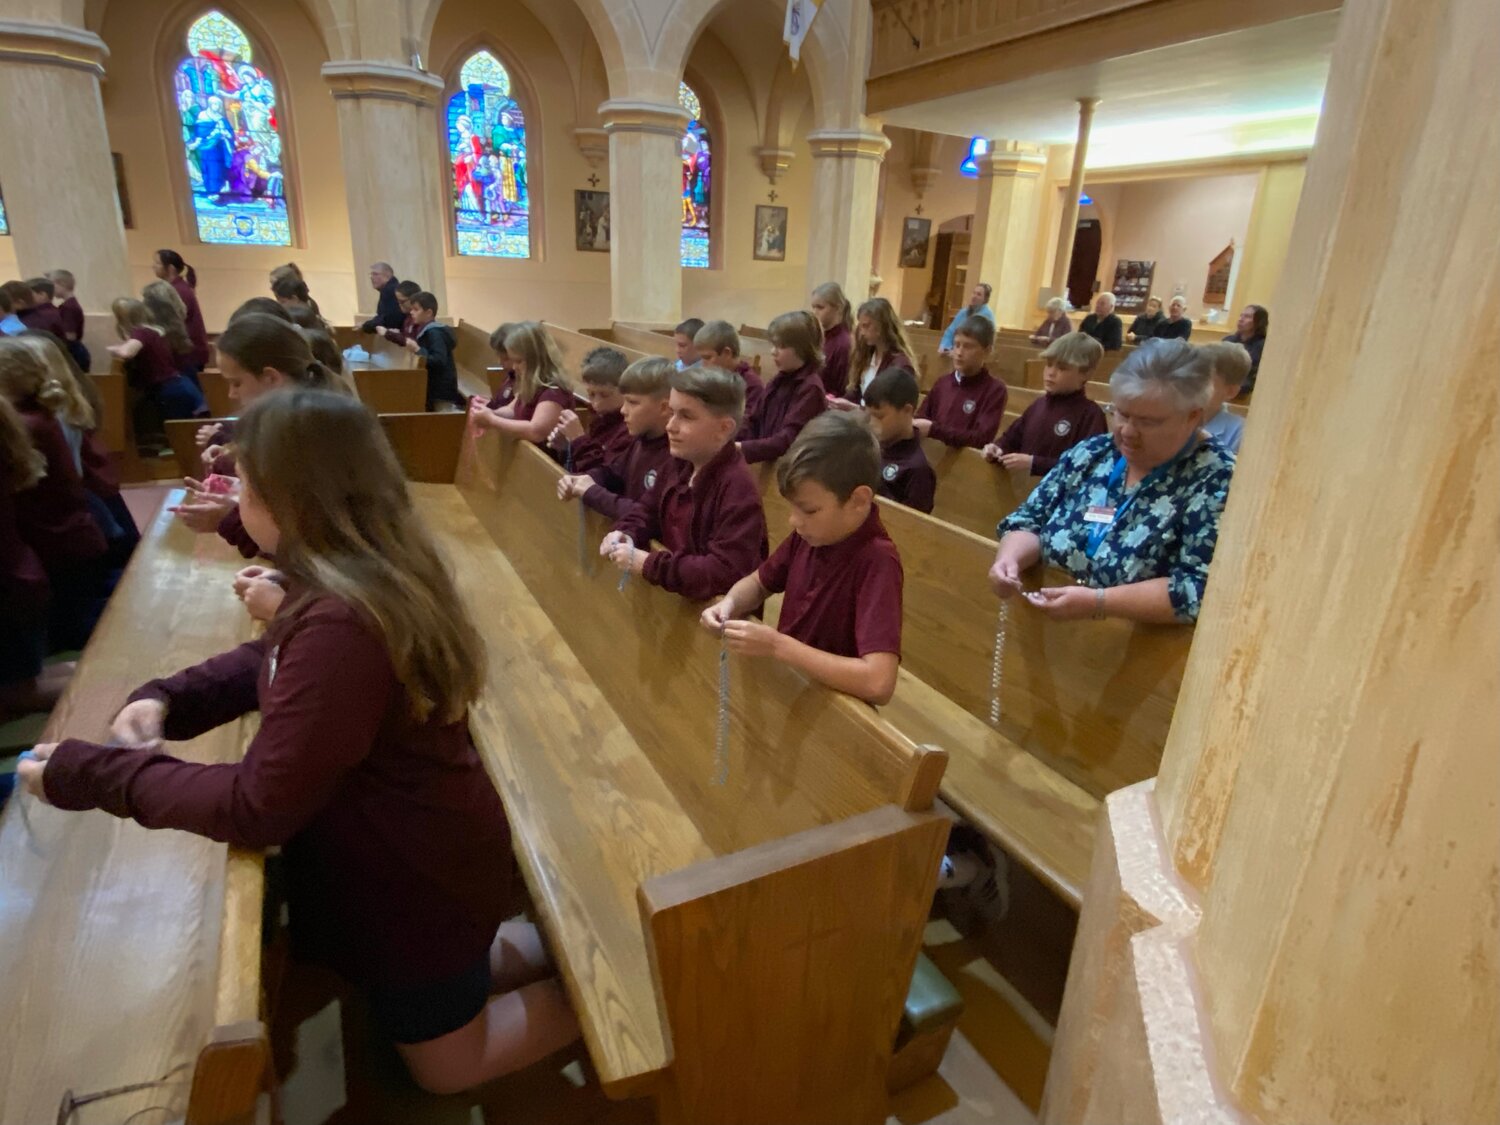 Students of St. George School in Hermann gather in church to pray the Rosary together.